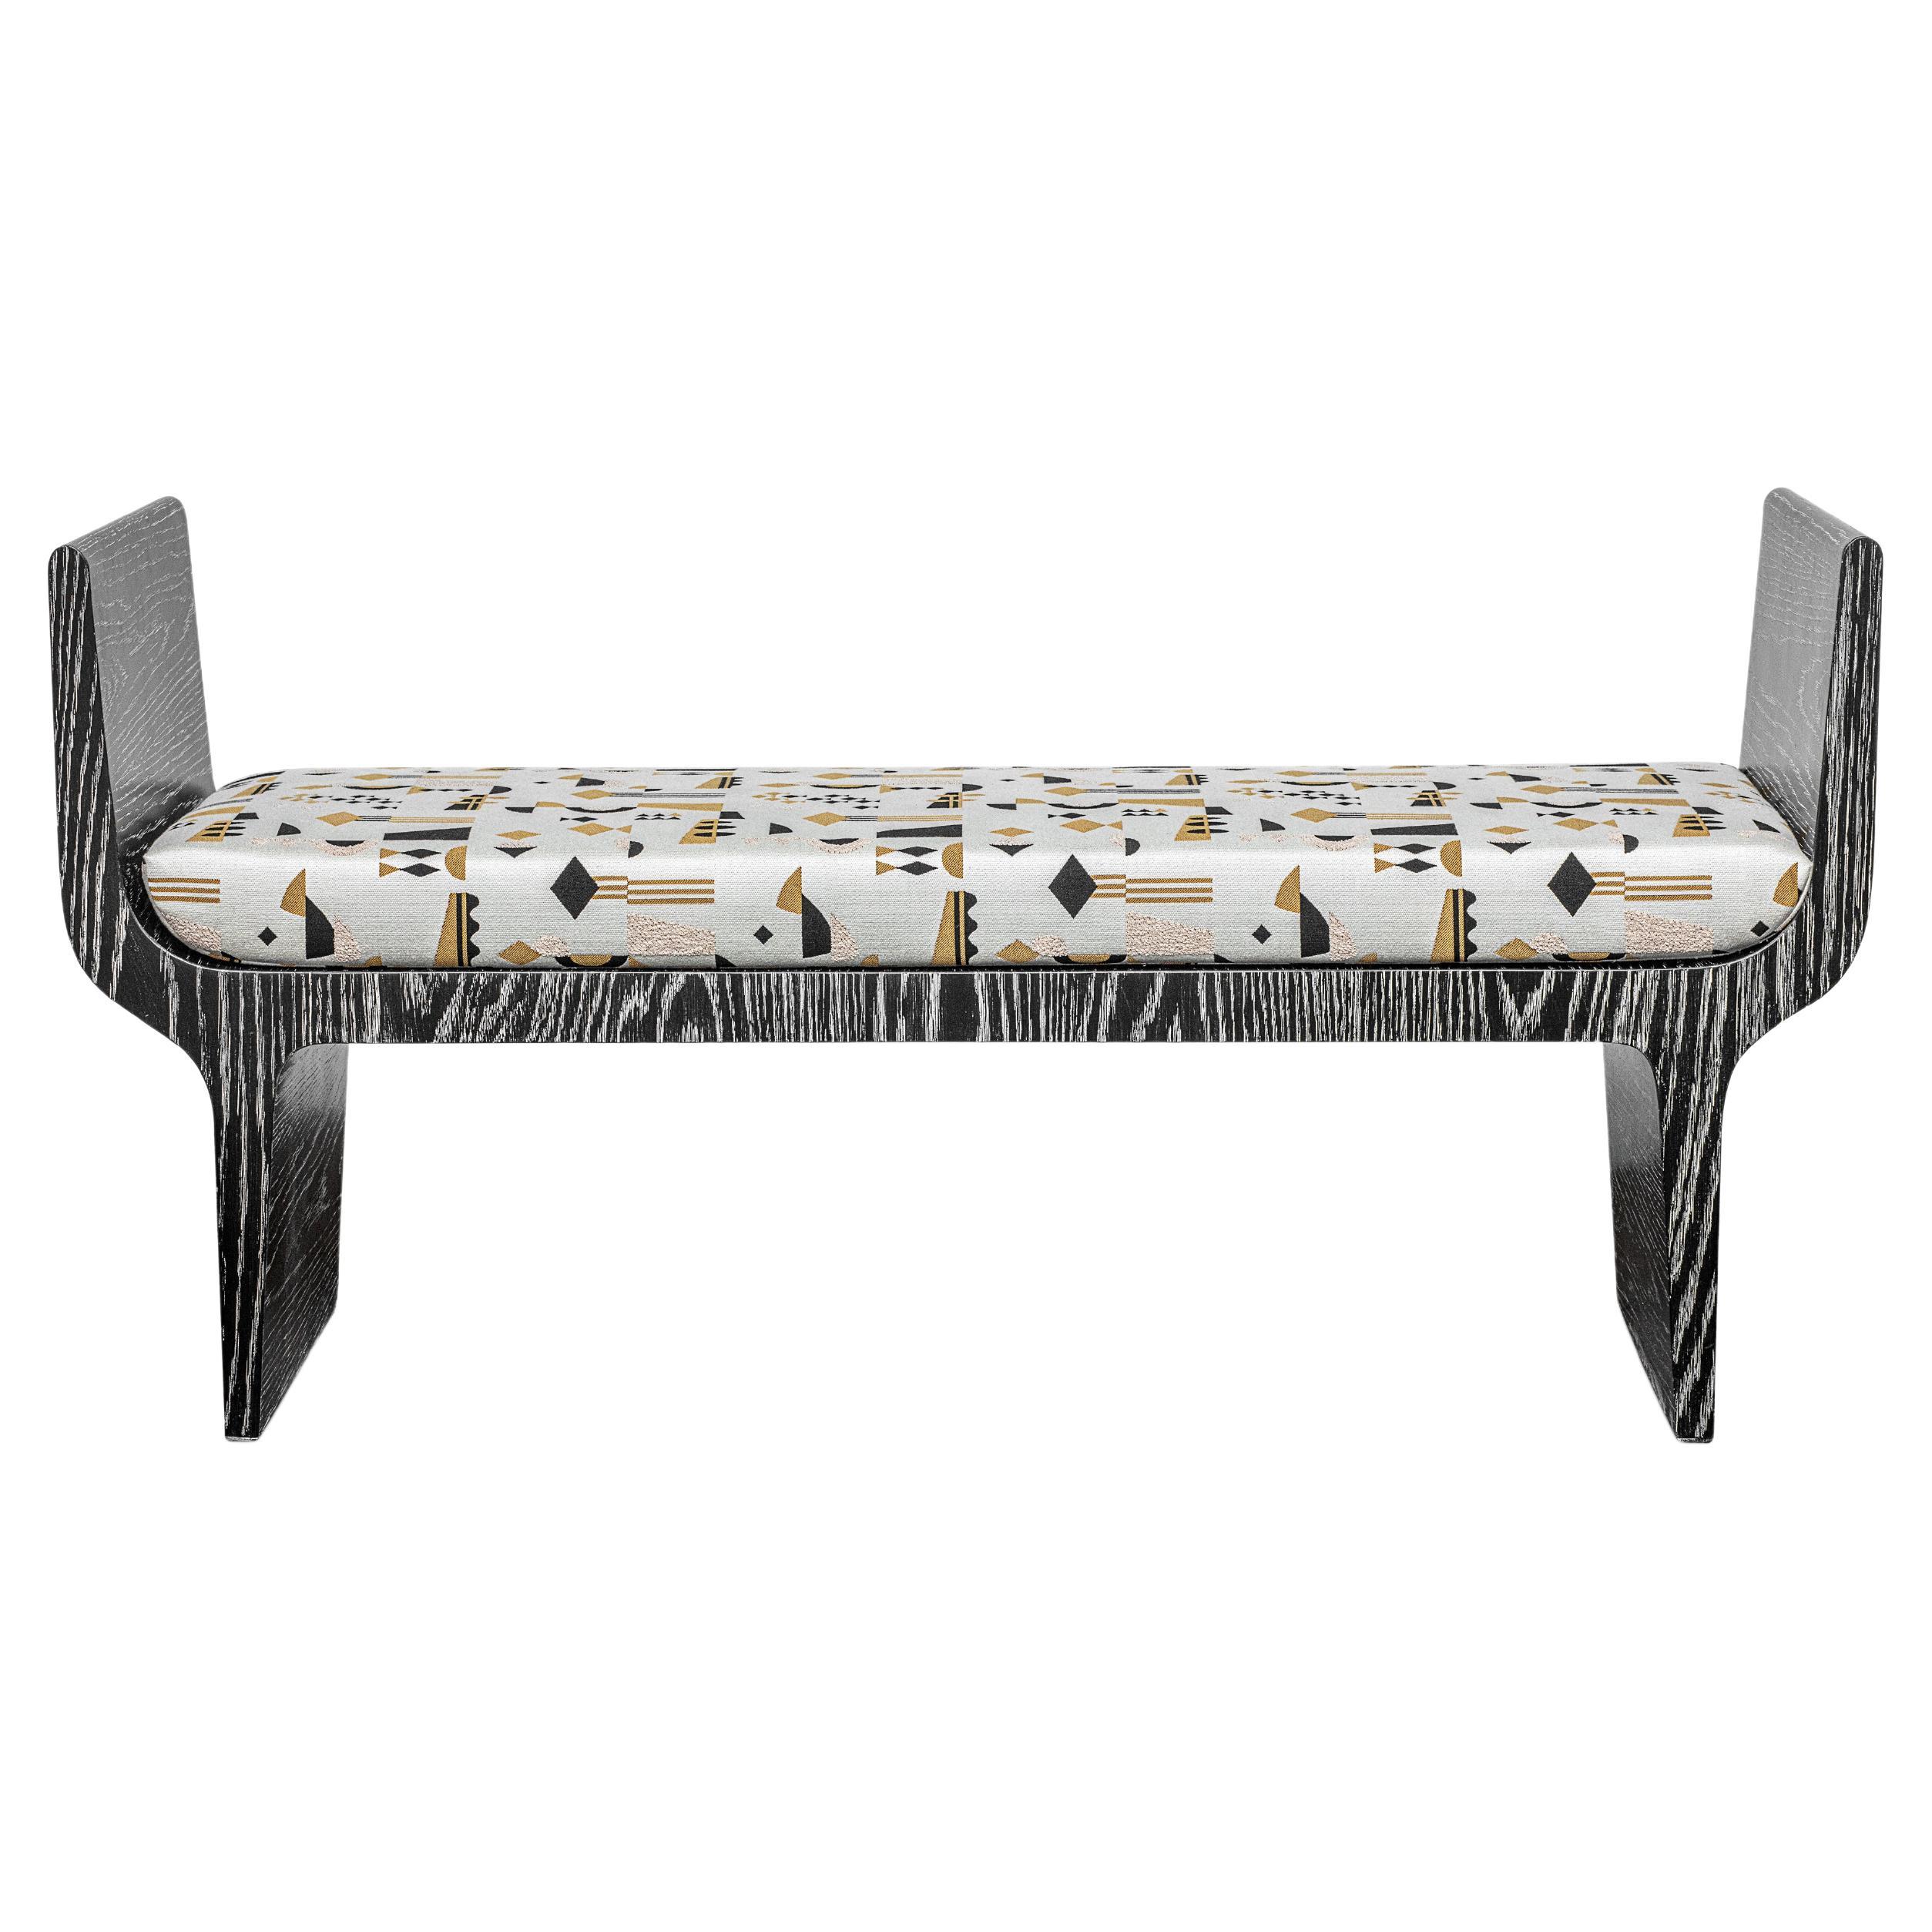 Copacabana Bench, Black Limed Oak by Duistt, Handcrafted in Portugal by Duistt For Sale